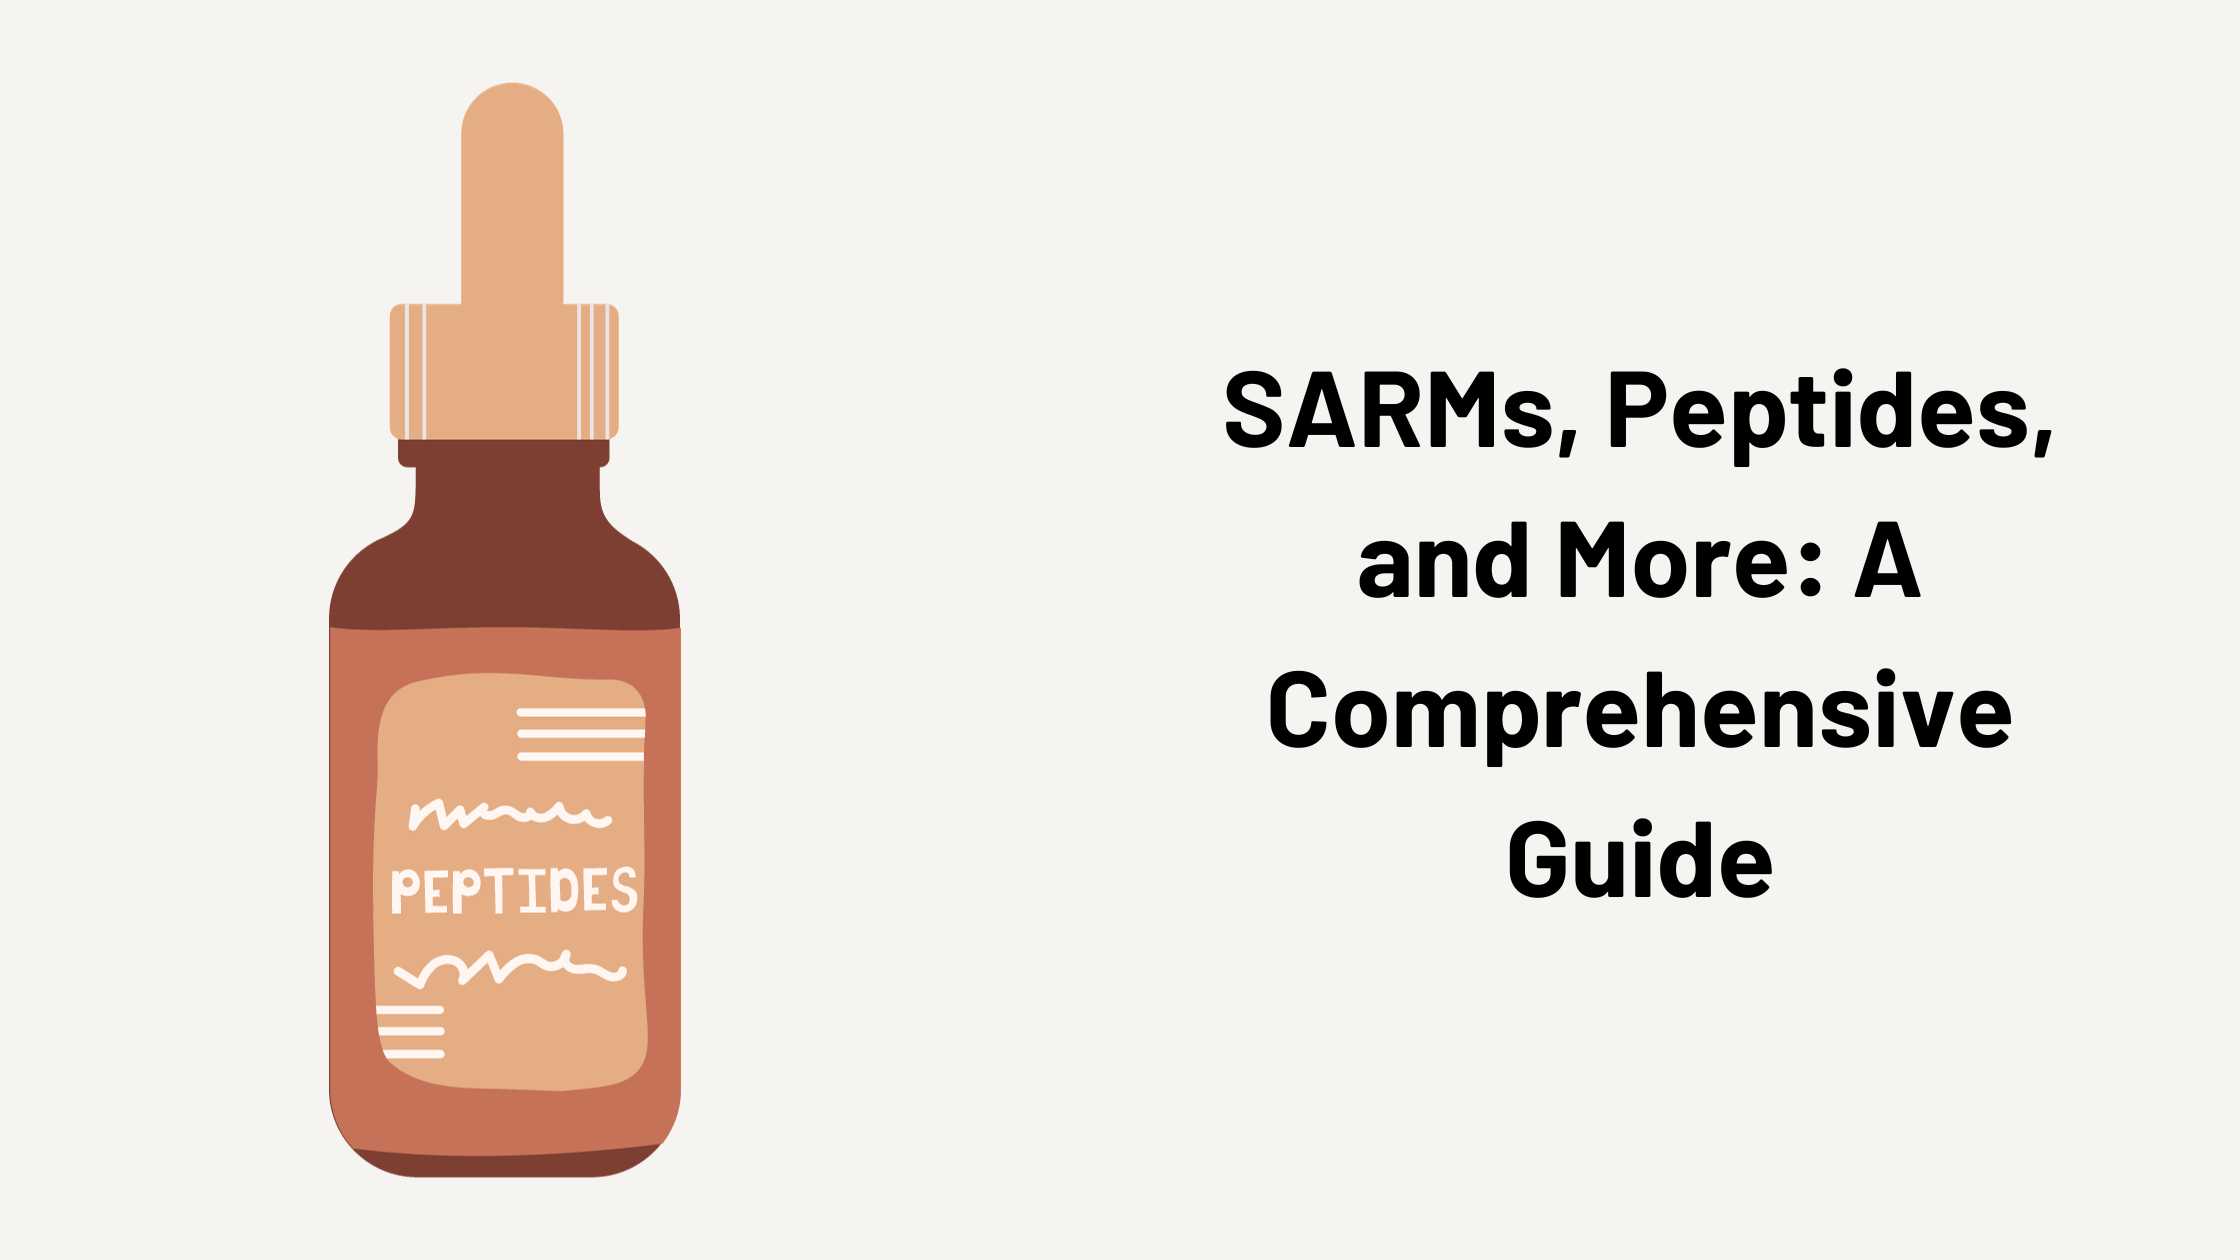 SARMs, Peptides, and More: A Comprehensive Guide